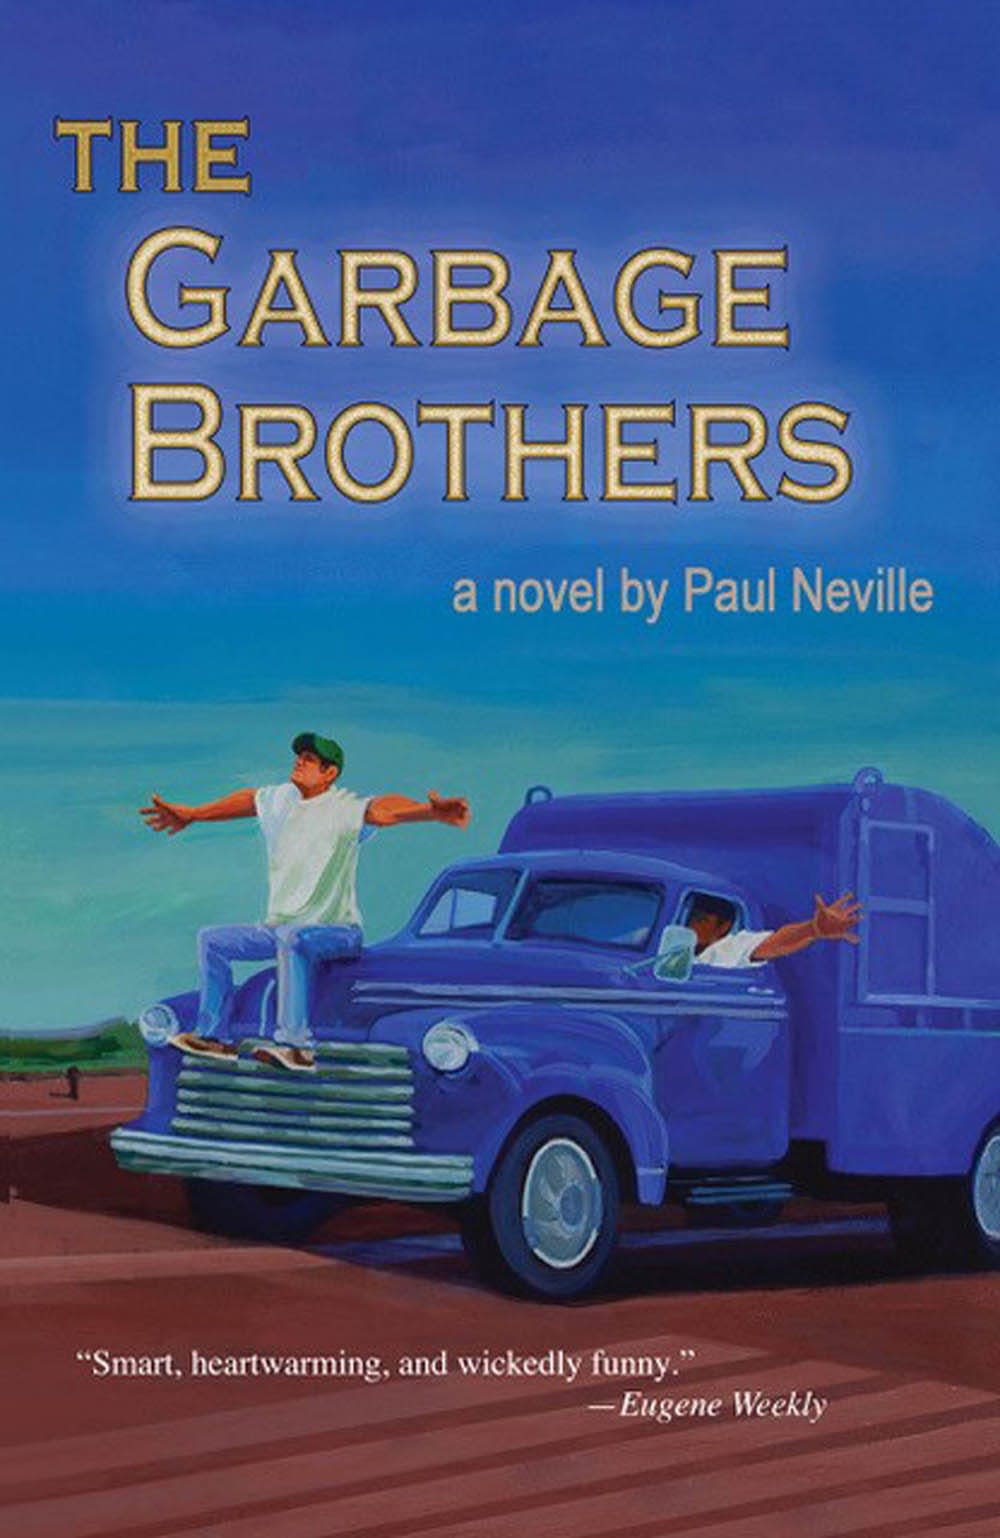 "The Garbage Brothers" is by Paul Neville.